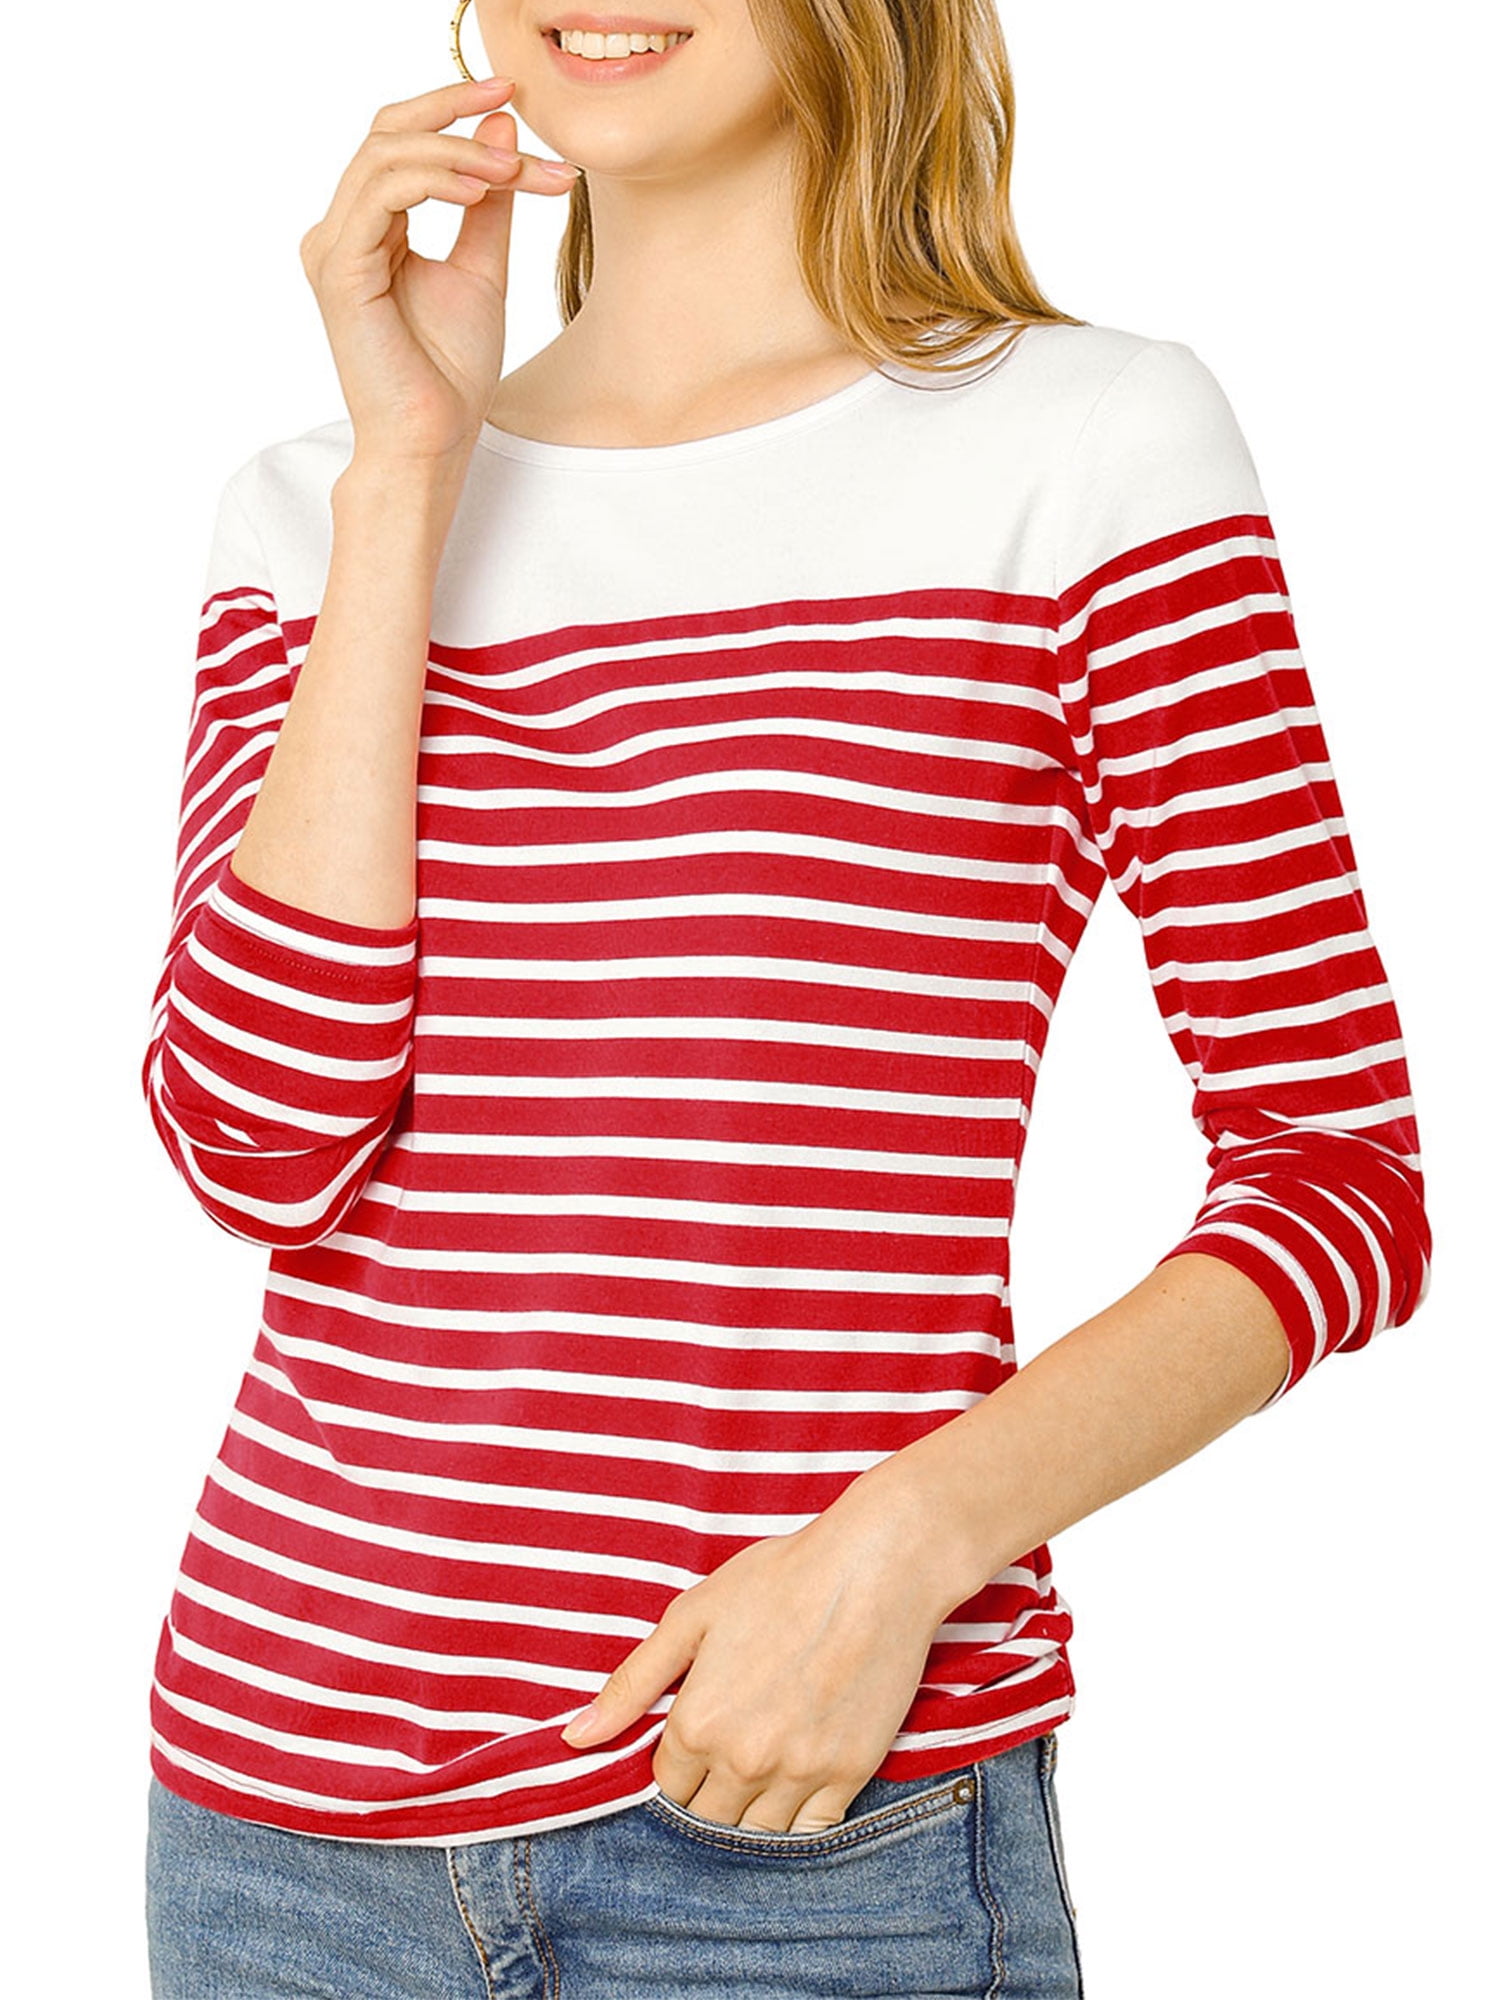 ENCOCO Womens Long Sleeve Striped T Shirts Color Block Round Neck Casual Blouses Tops